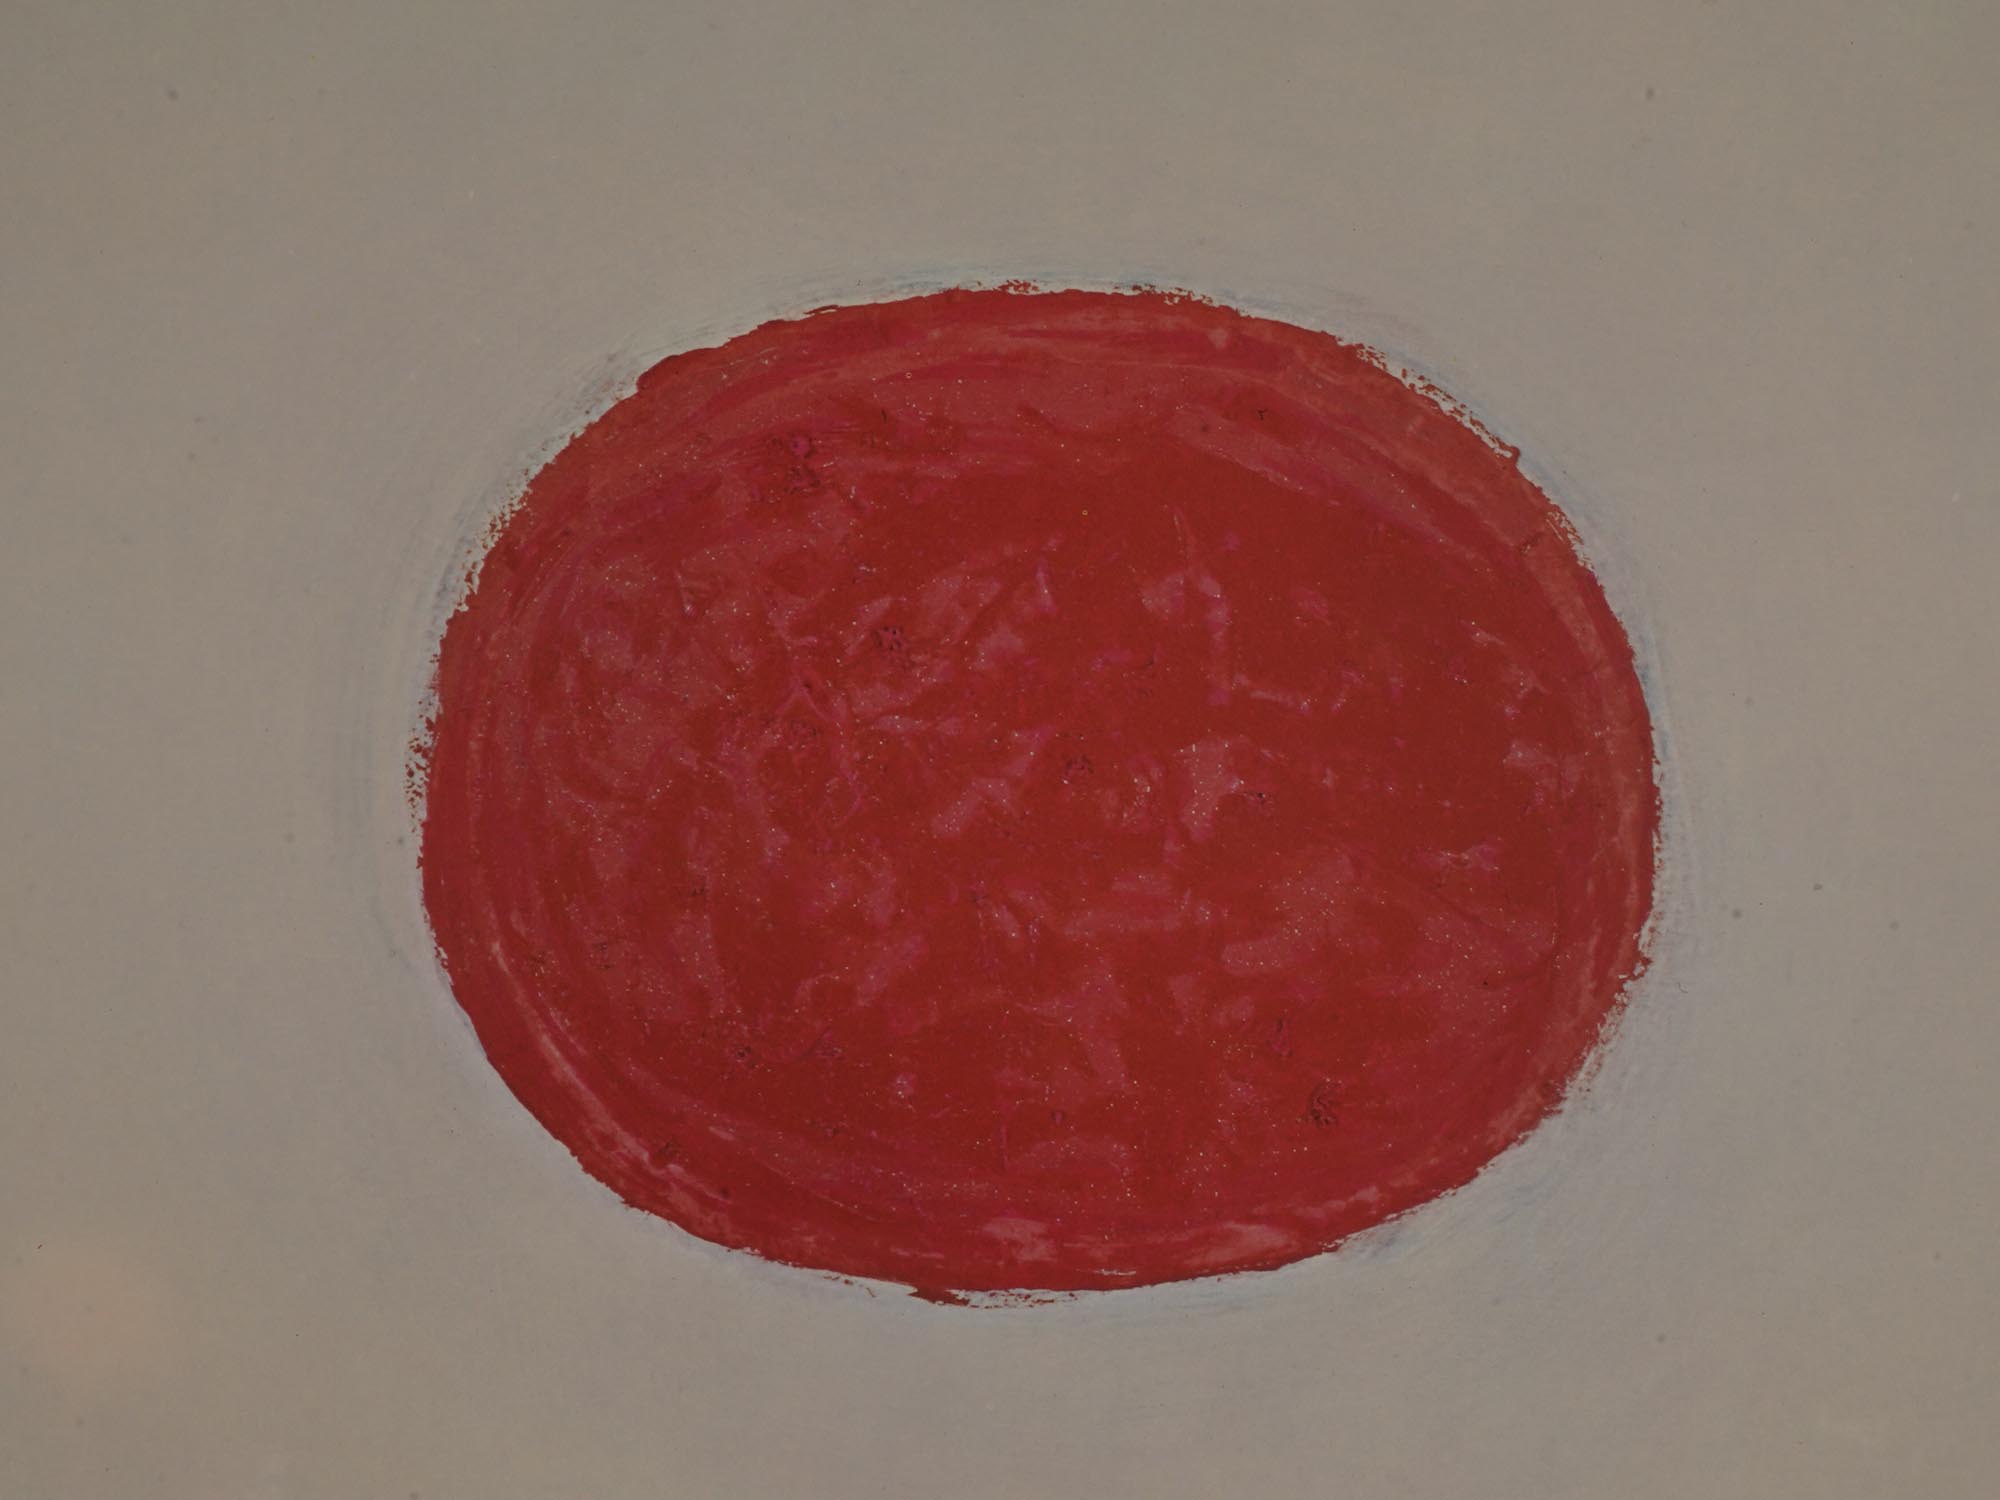 ABSTRACT AMERICAN LITHOGRAPH BY ADOLPH GOTTLIEB PIC-2